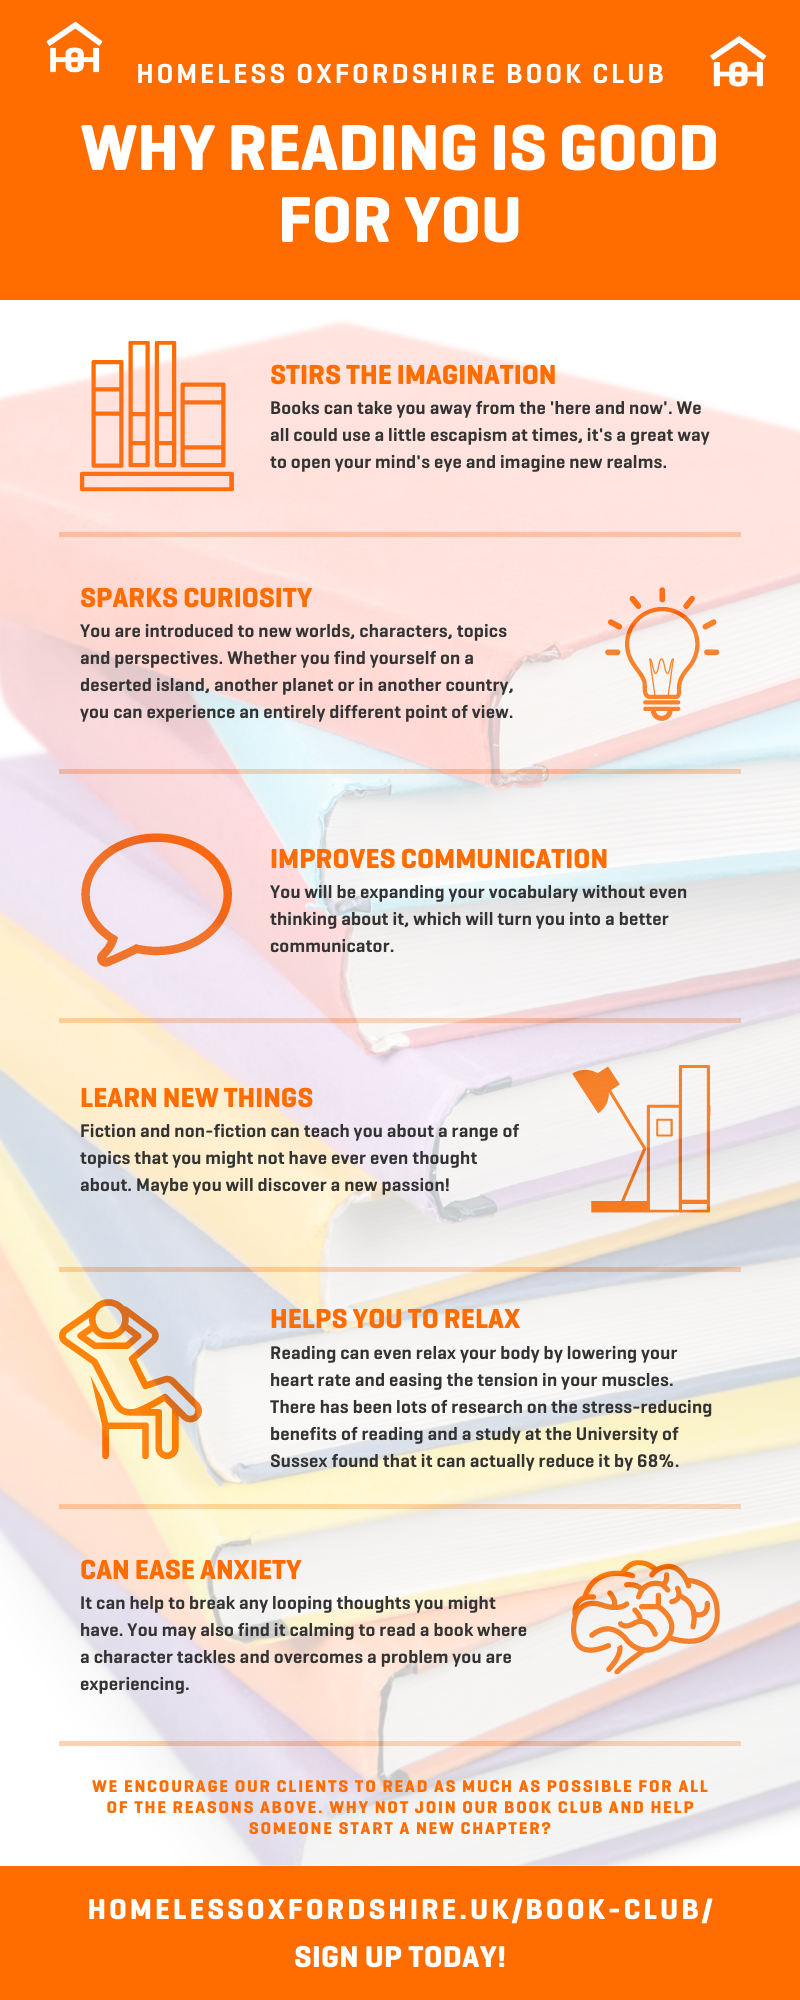 An infographic with the title 'why reading is good for you'. 

Subheadings include,
1) It stirs the imagination
2) It sparks curiosity
3) It improves communication
4) Learn new things
5) Helps you to relax
6) Can ease anxiety 

Infographic ends with the text 'We encourage our clients to read as much as possible for all of the reasons above. Why not join our book club and help someone start a new chapter?'
